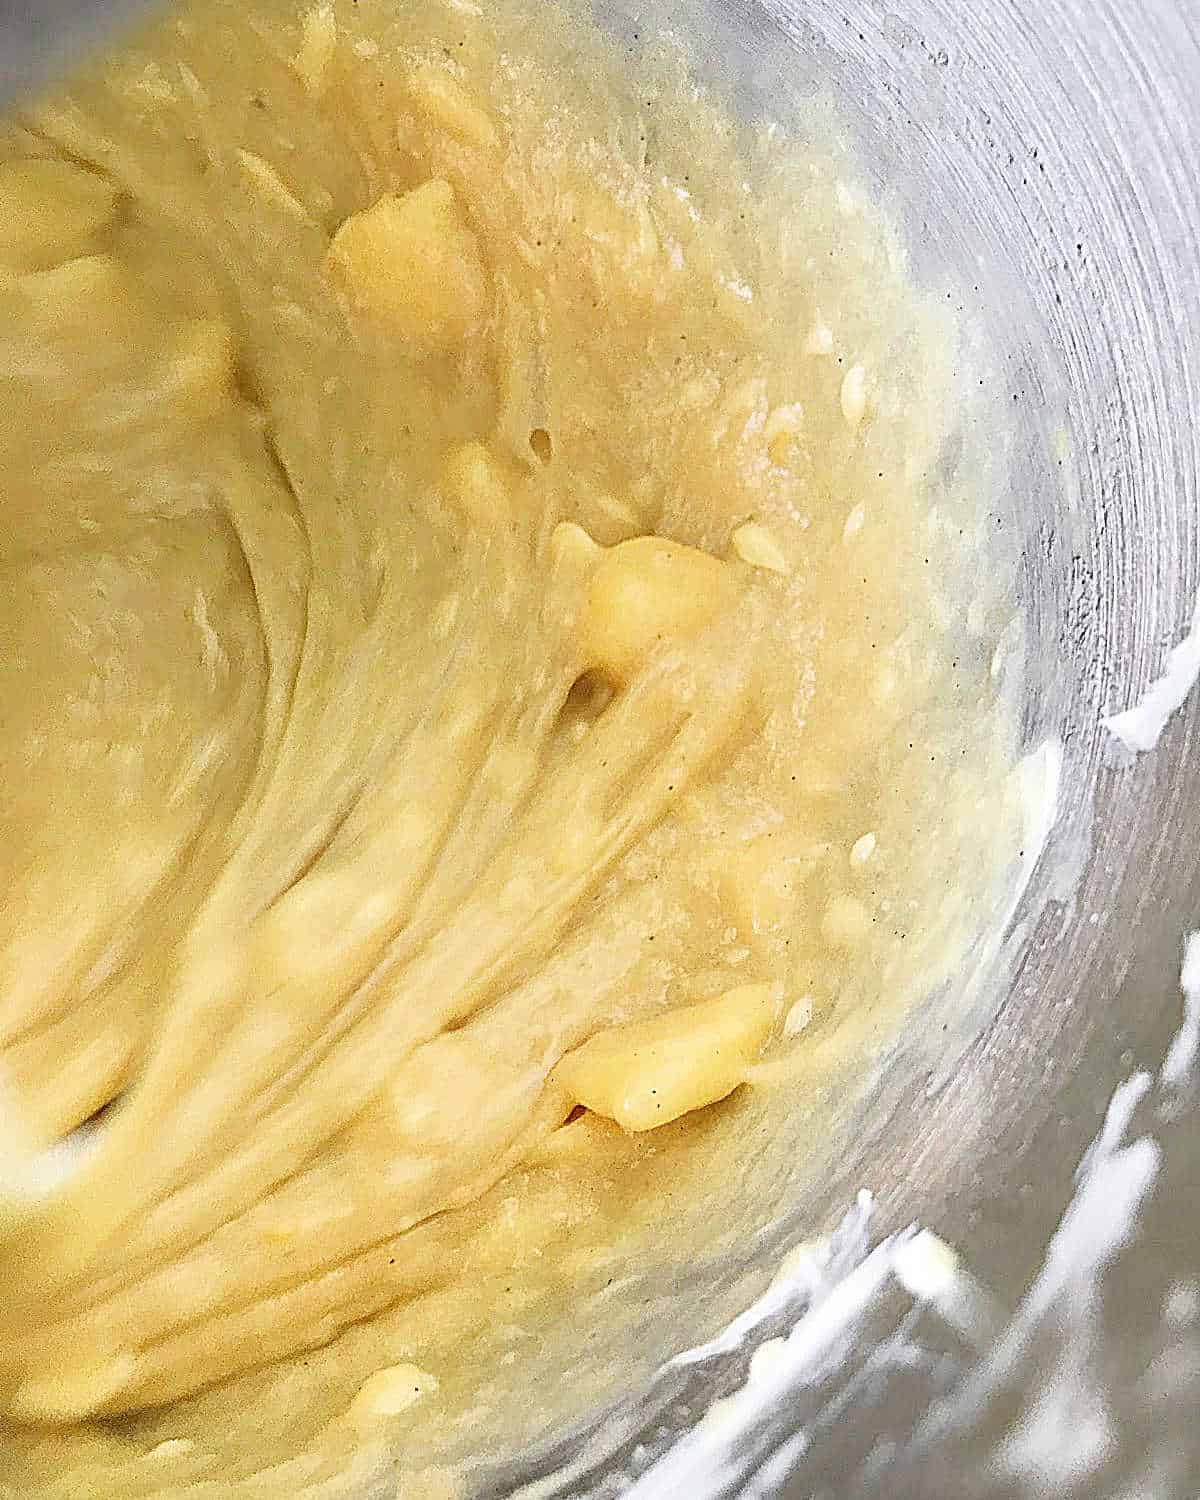 Golden pandoro dough being beaten with butter in a metal bowl. Close up.